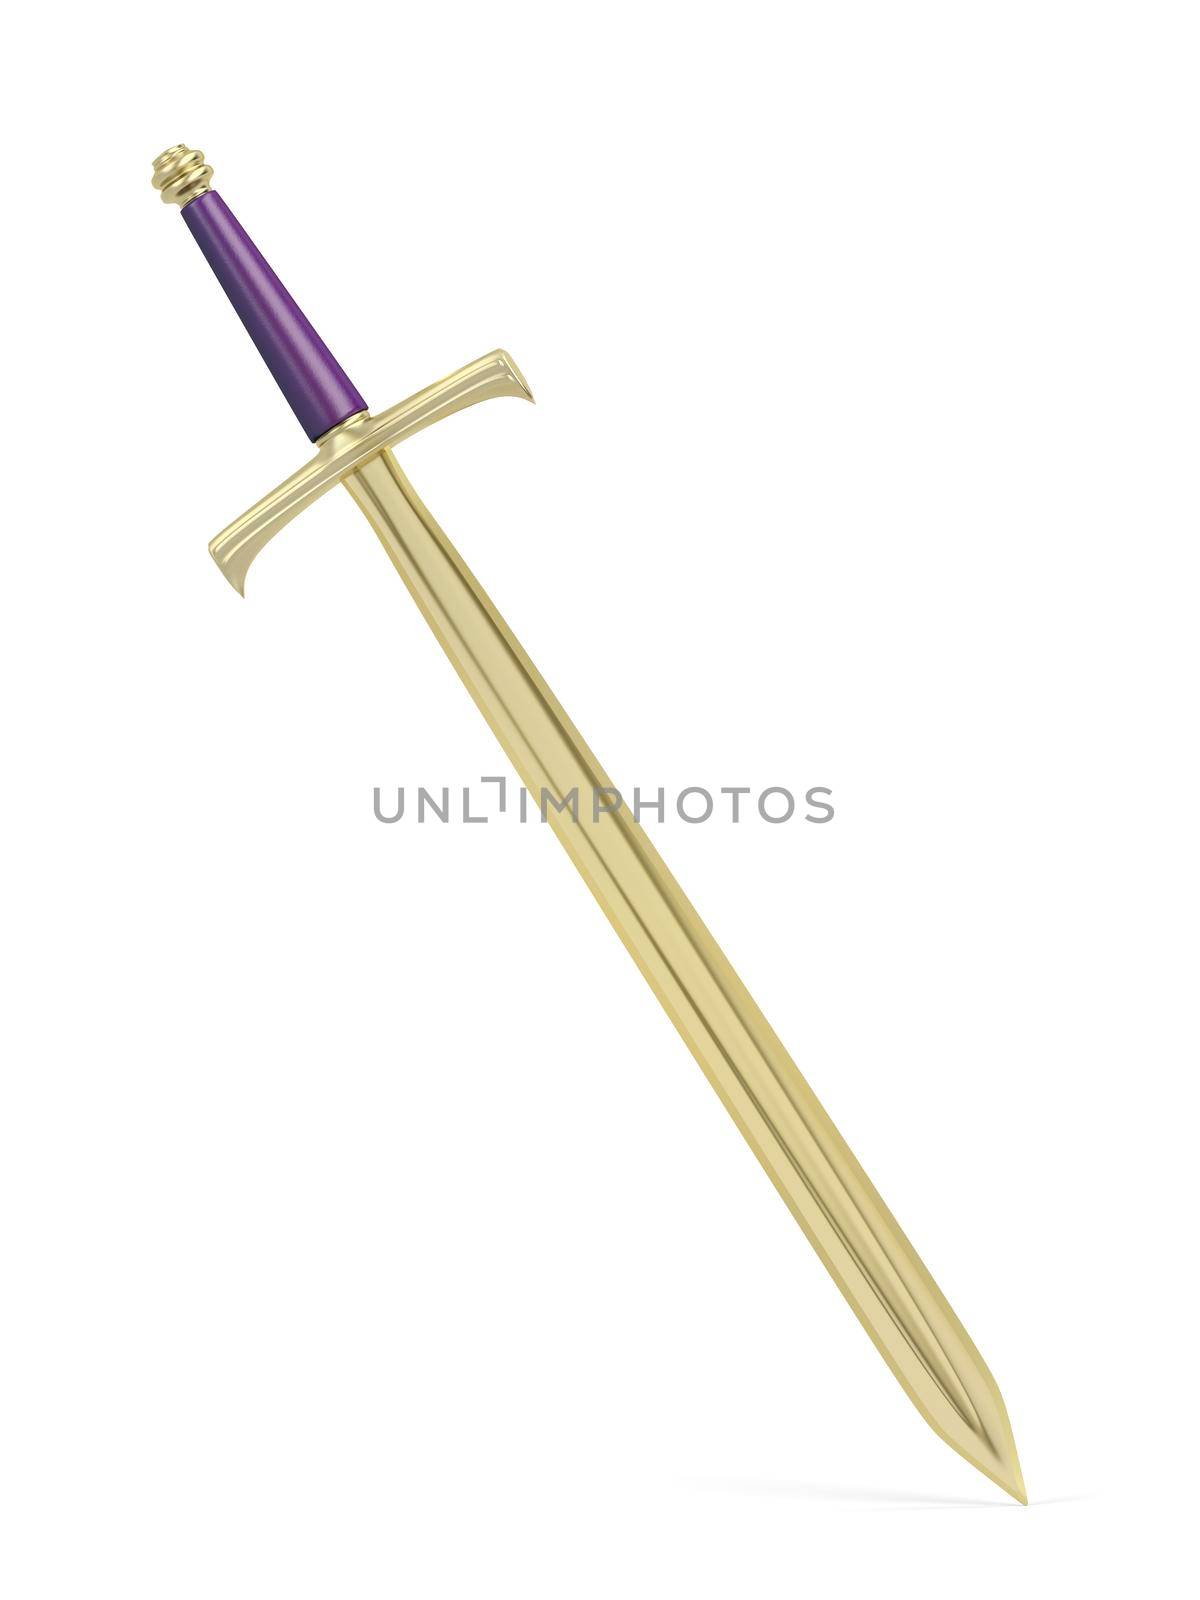 Medieval sword by magraphics